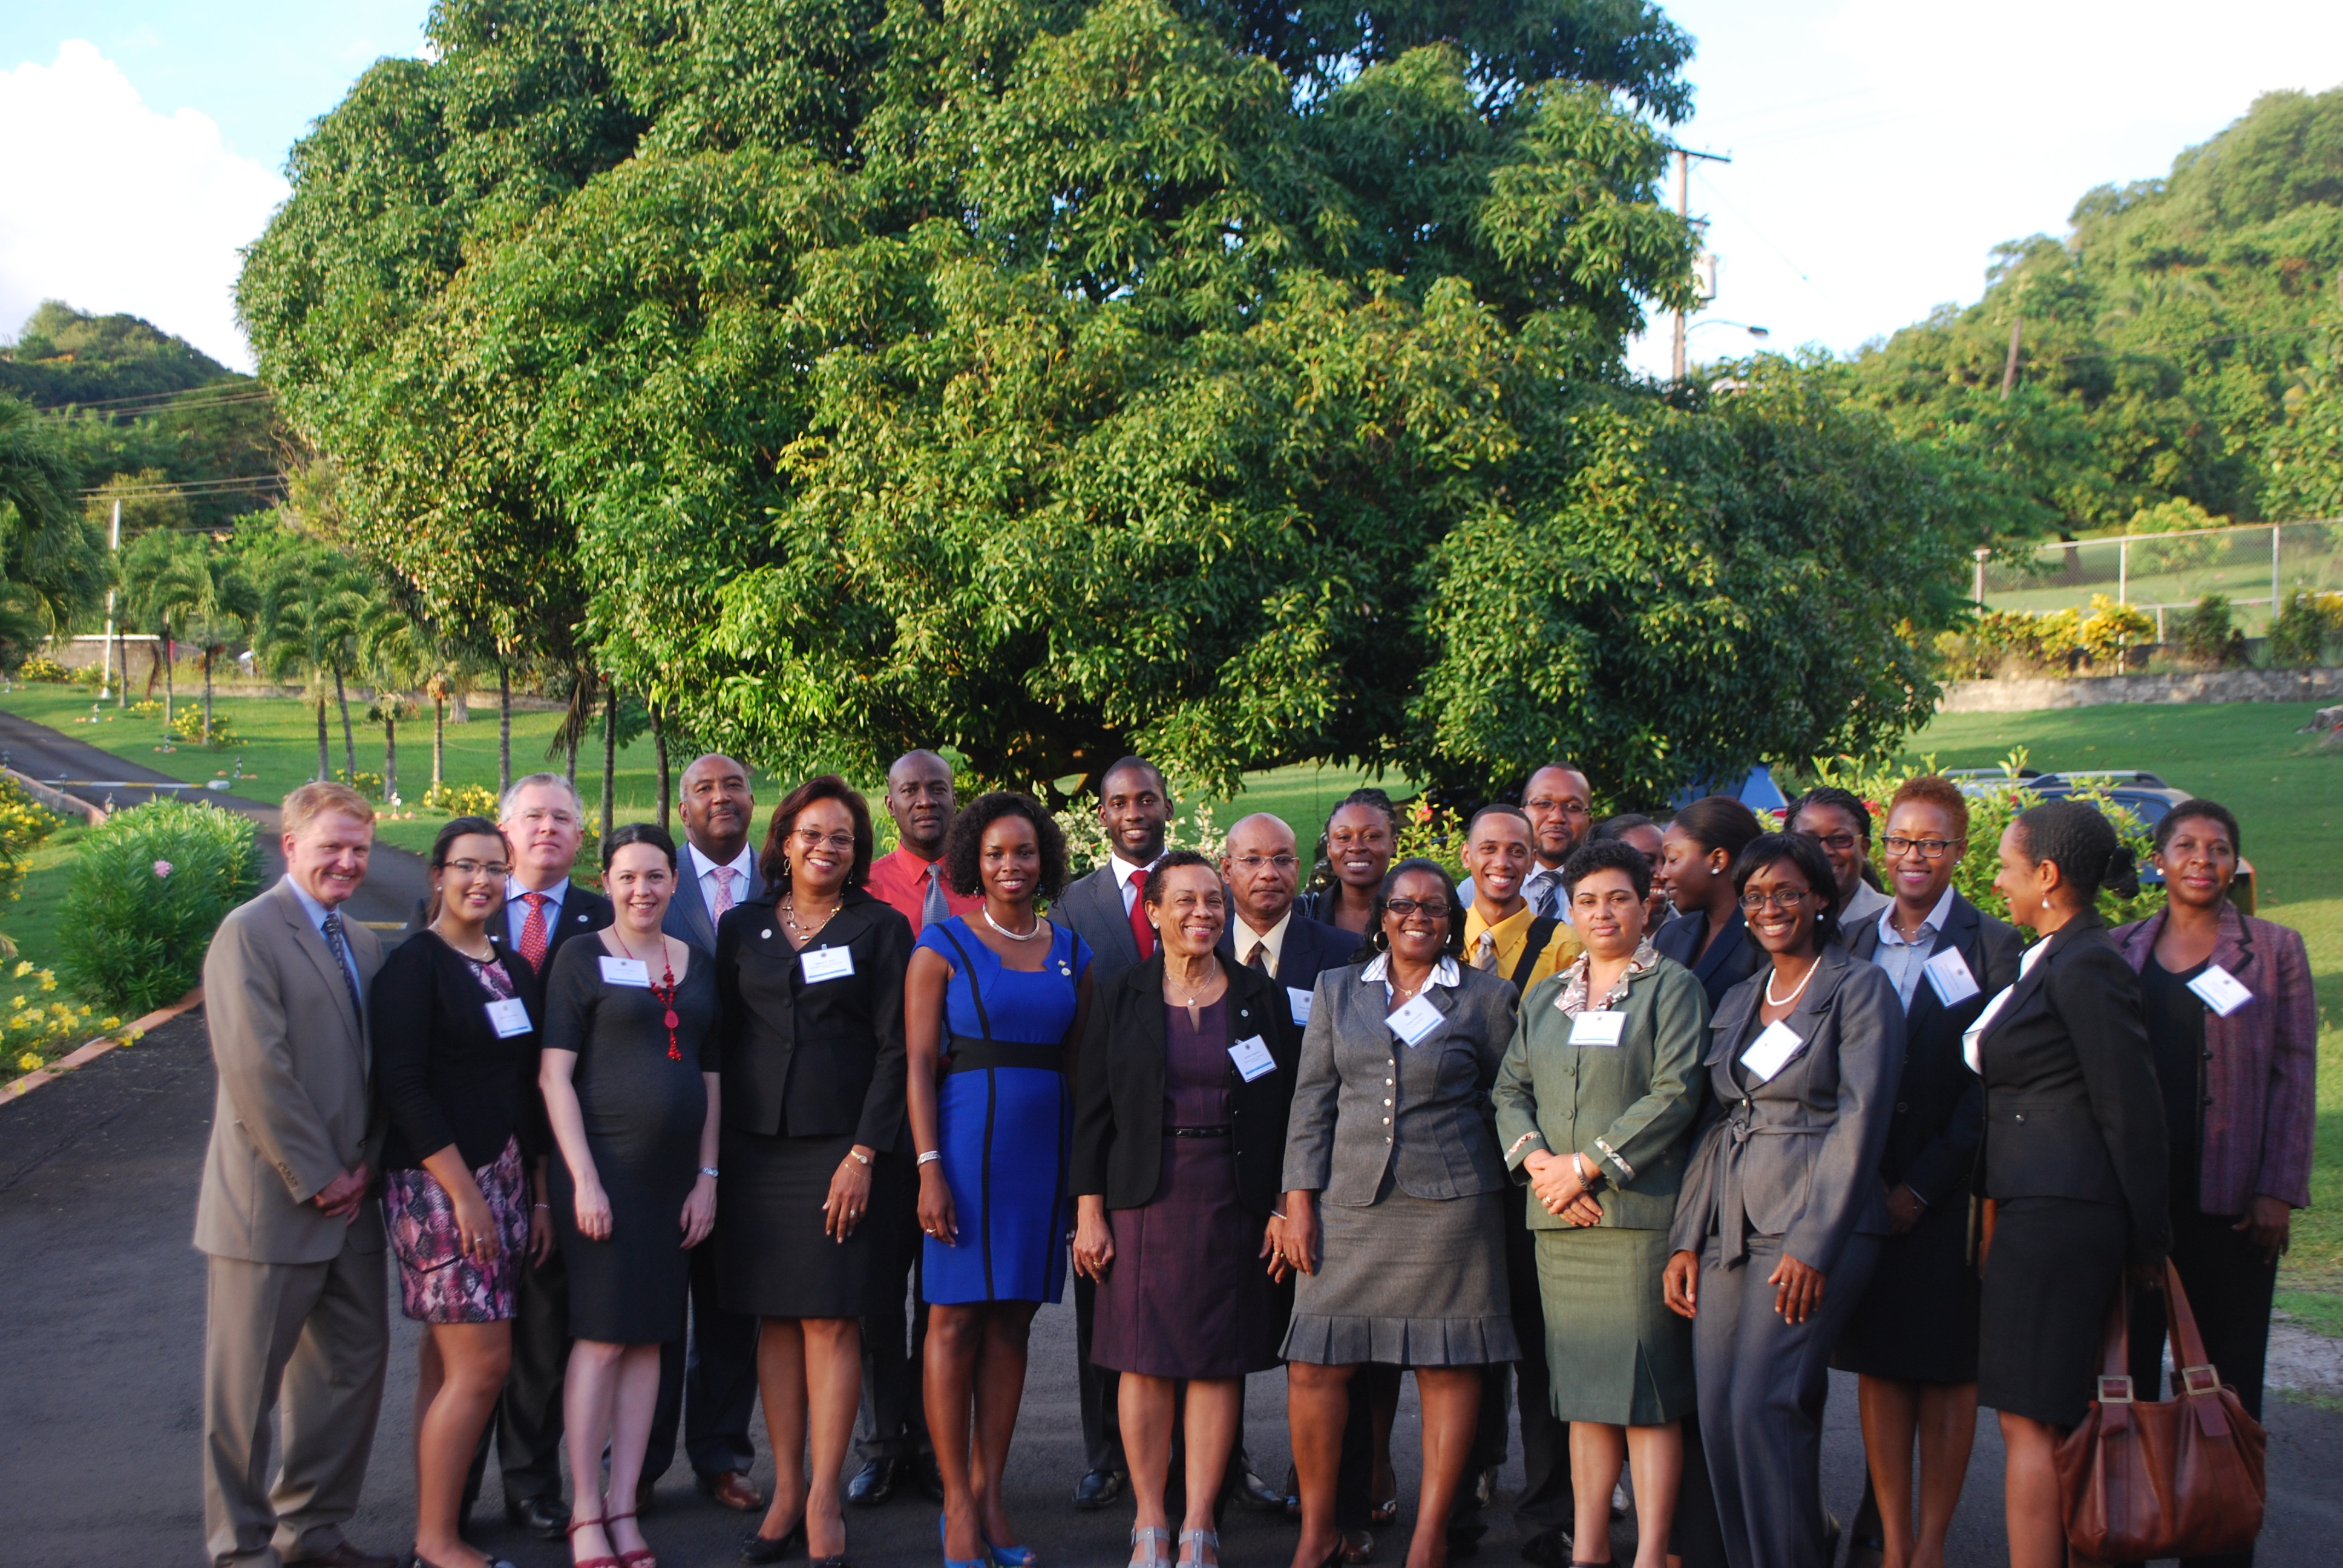 Participants in the OAS Regional Workshop on Civil Registries held in Villa, St. Vincent and the Grenadines in October 2013(October 11, 2013)